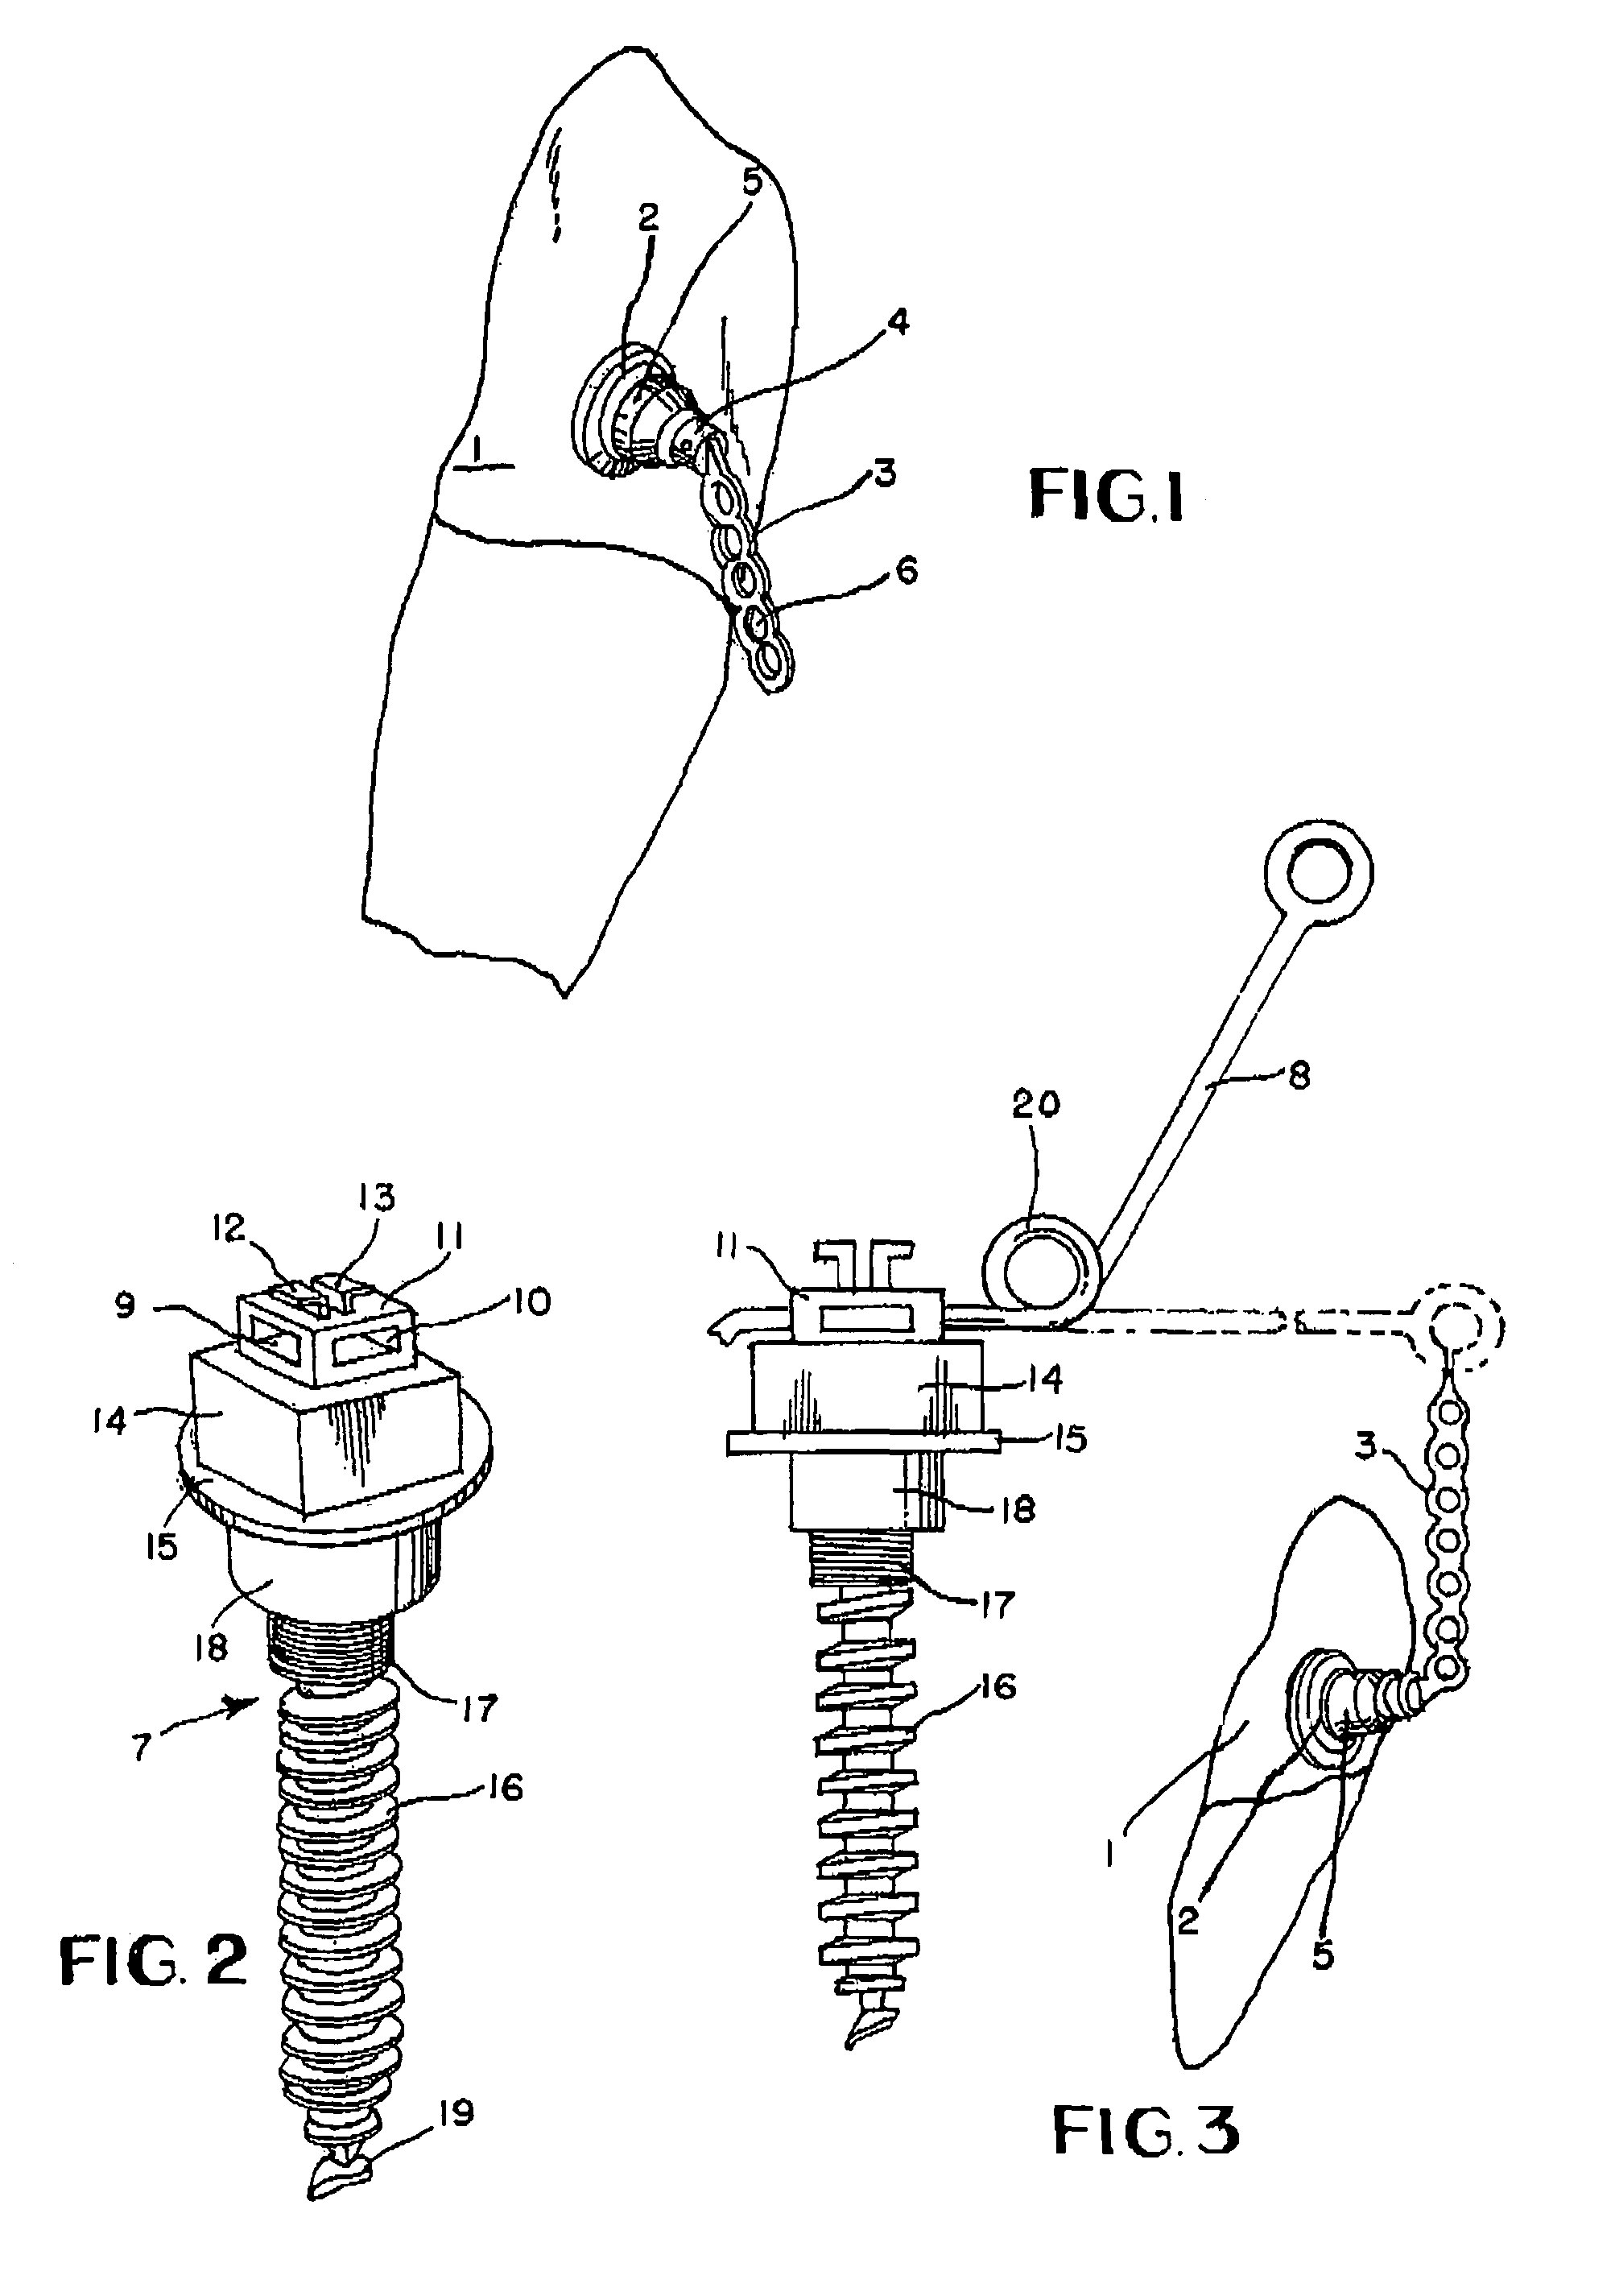 Impacted tooth appliance